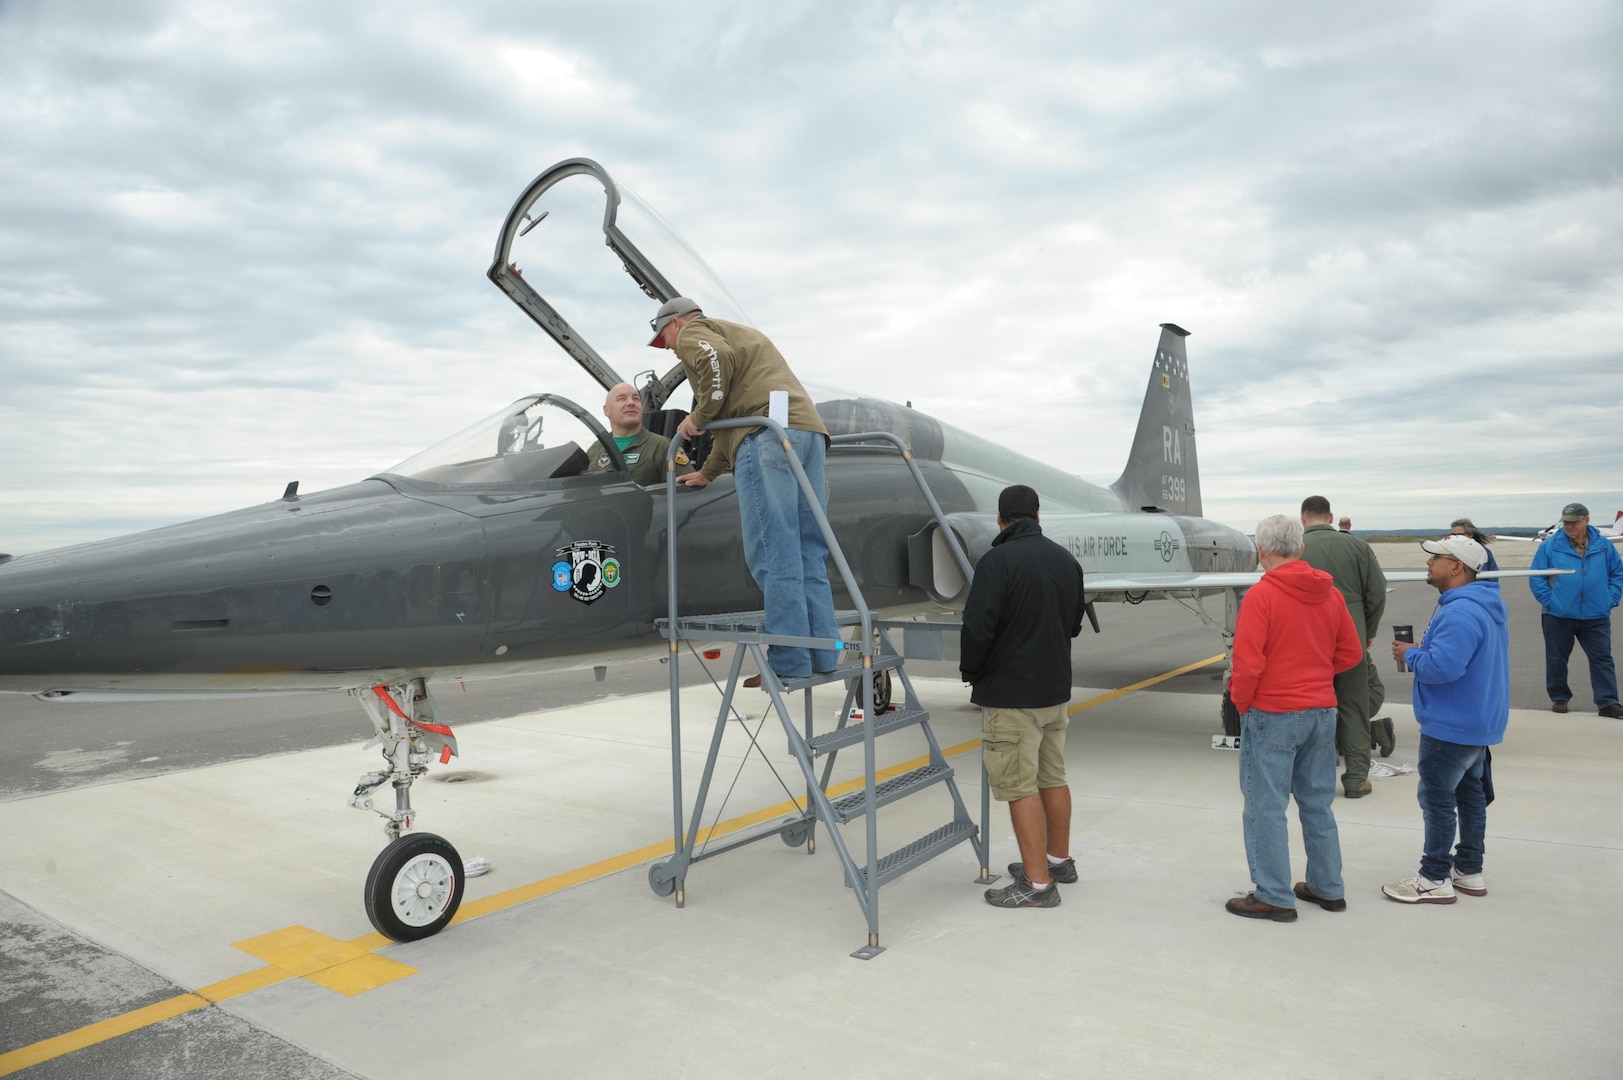 Maj. Vince Sherer, 560th Flying Training Squadron, student instructor, shows the T-38 Talon aircraft to spectators, during the Joint Base San Antonio Seguin Auxiliary Airfield Open House, Nov. 13, 2015. JBSA-Randolph Auxiliary Airfield is used solely by the 560th Flying Training Squadron for preparing instructors for undergraduate pilot training T-38 training assignments.  The 560th primarily uses Seguin Auxfield for practice landings in a pilot controlled pattern called instead of FAA controllers. (U.S. Air Force photo by Joel Martinez/Released) 